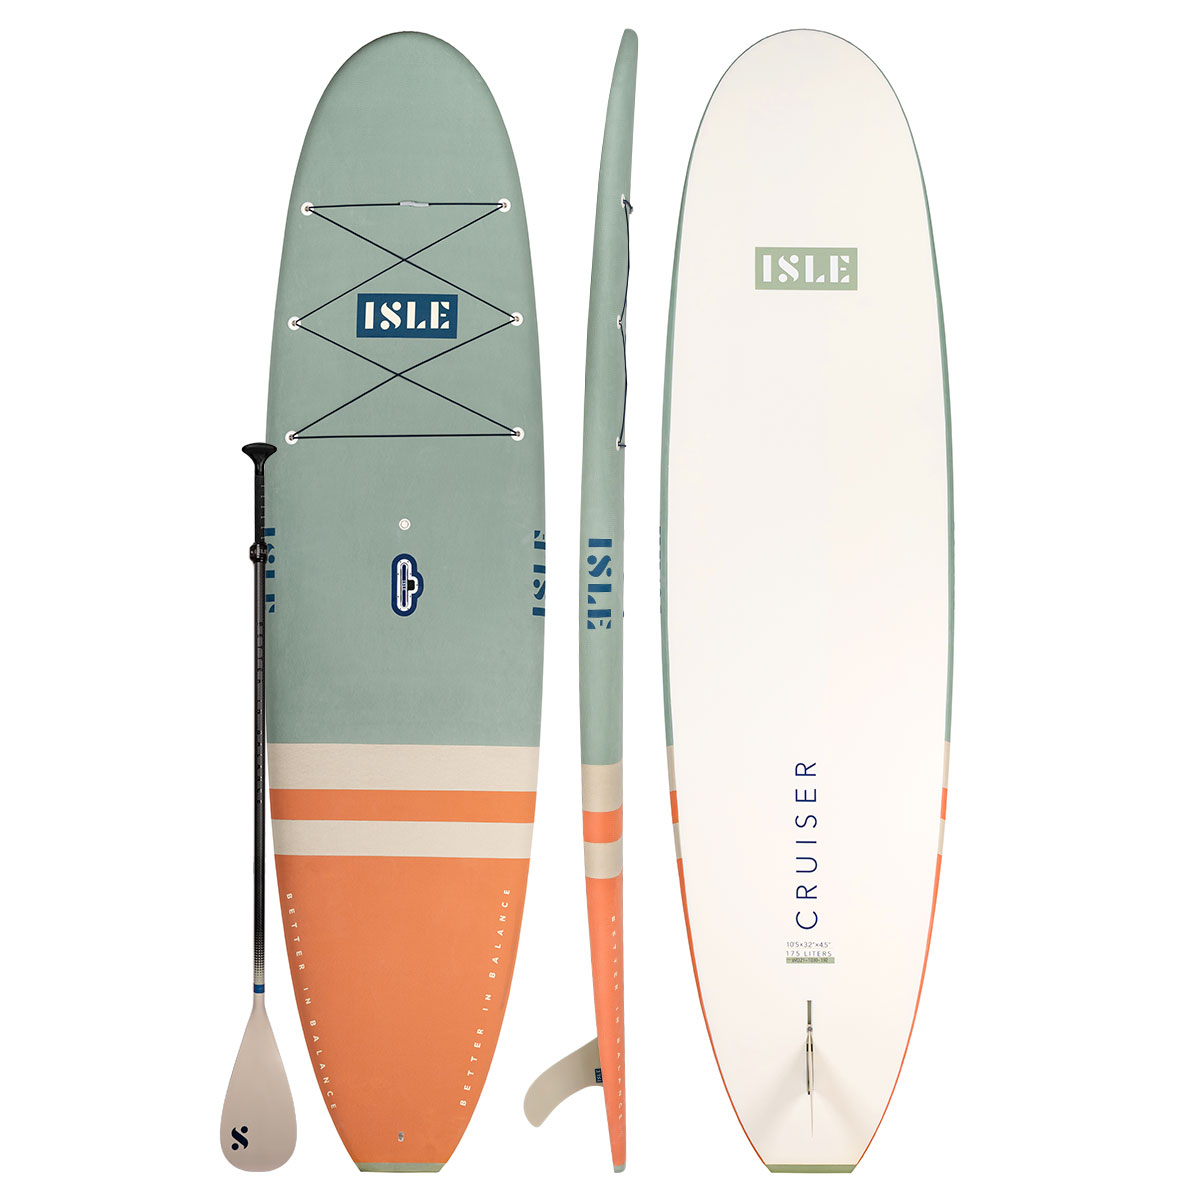 Cruiser 2.0Stand Up Paddle Board PackageThis soft-top hard board features a non-slip, full grip deck pad, providing the ultimate comfort and stability needed for every type of water activity.